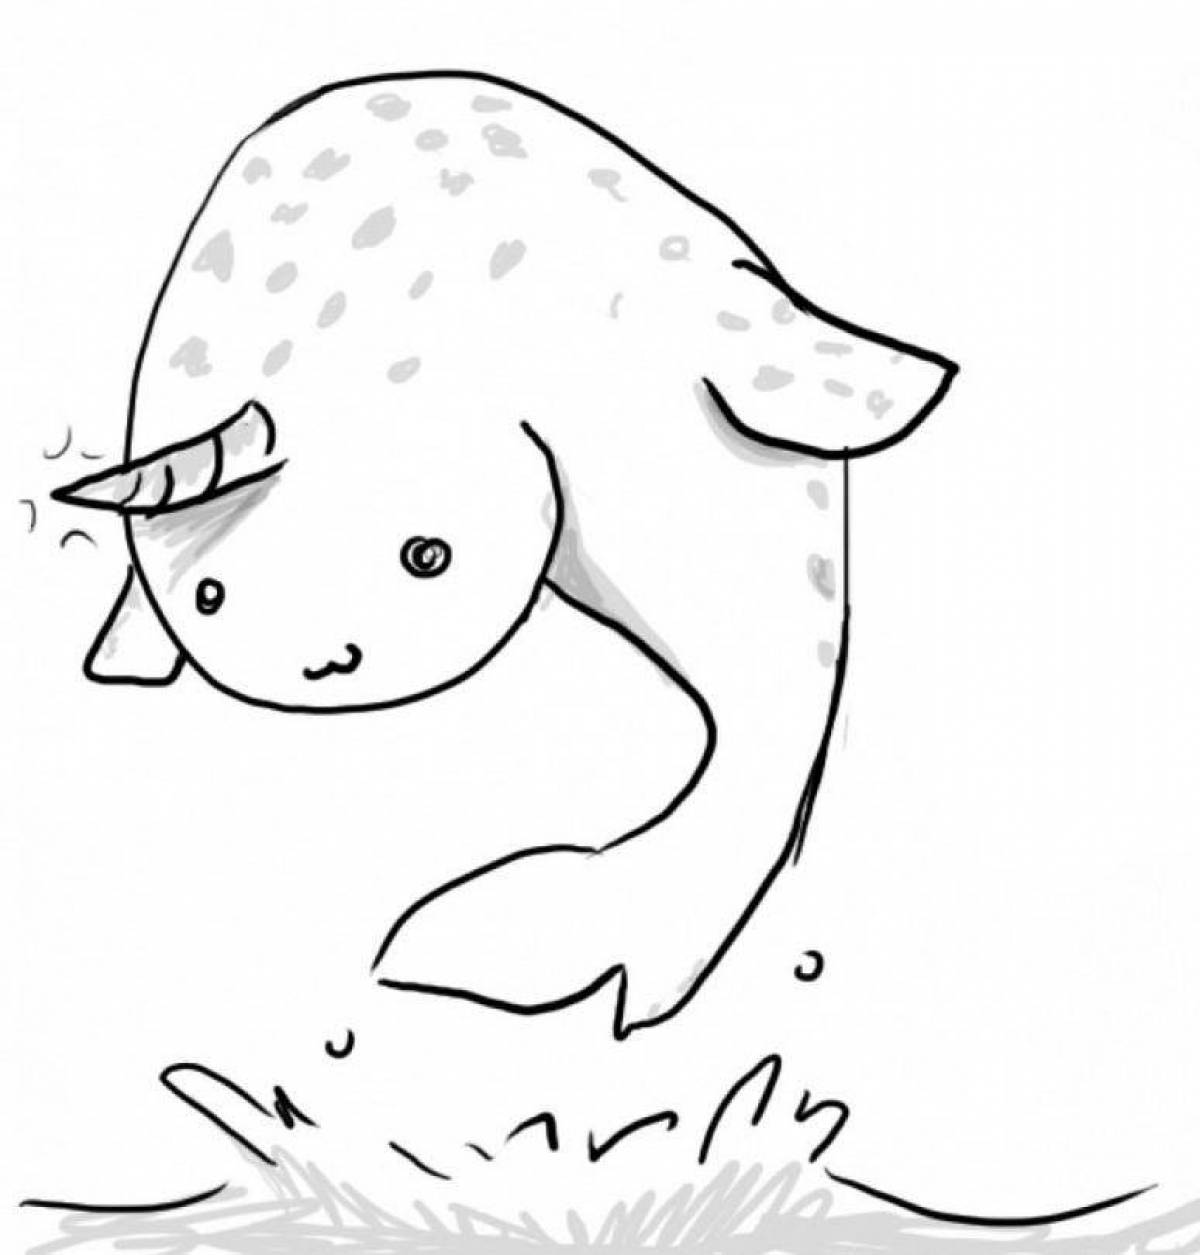 Exquisite narwhal coloring book